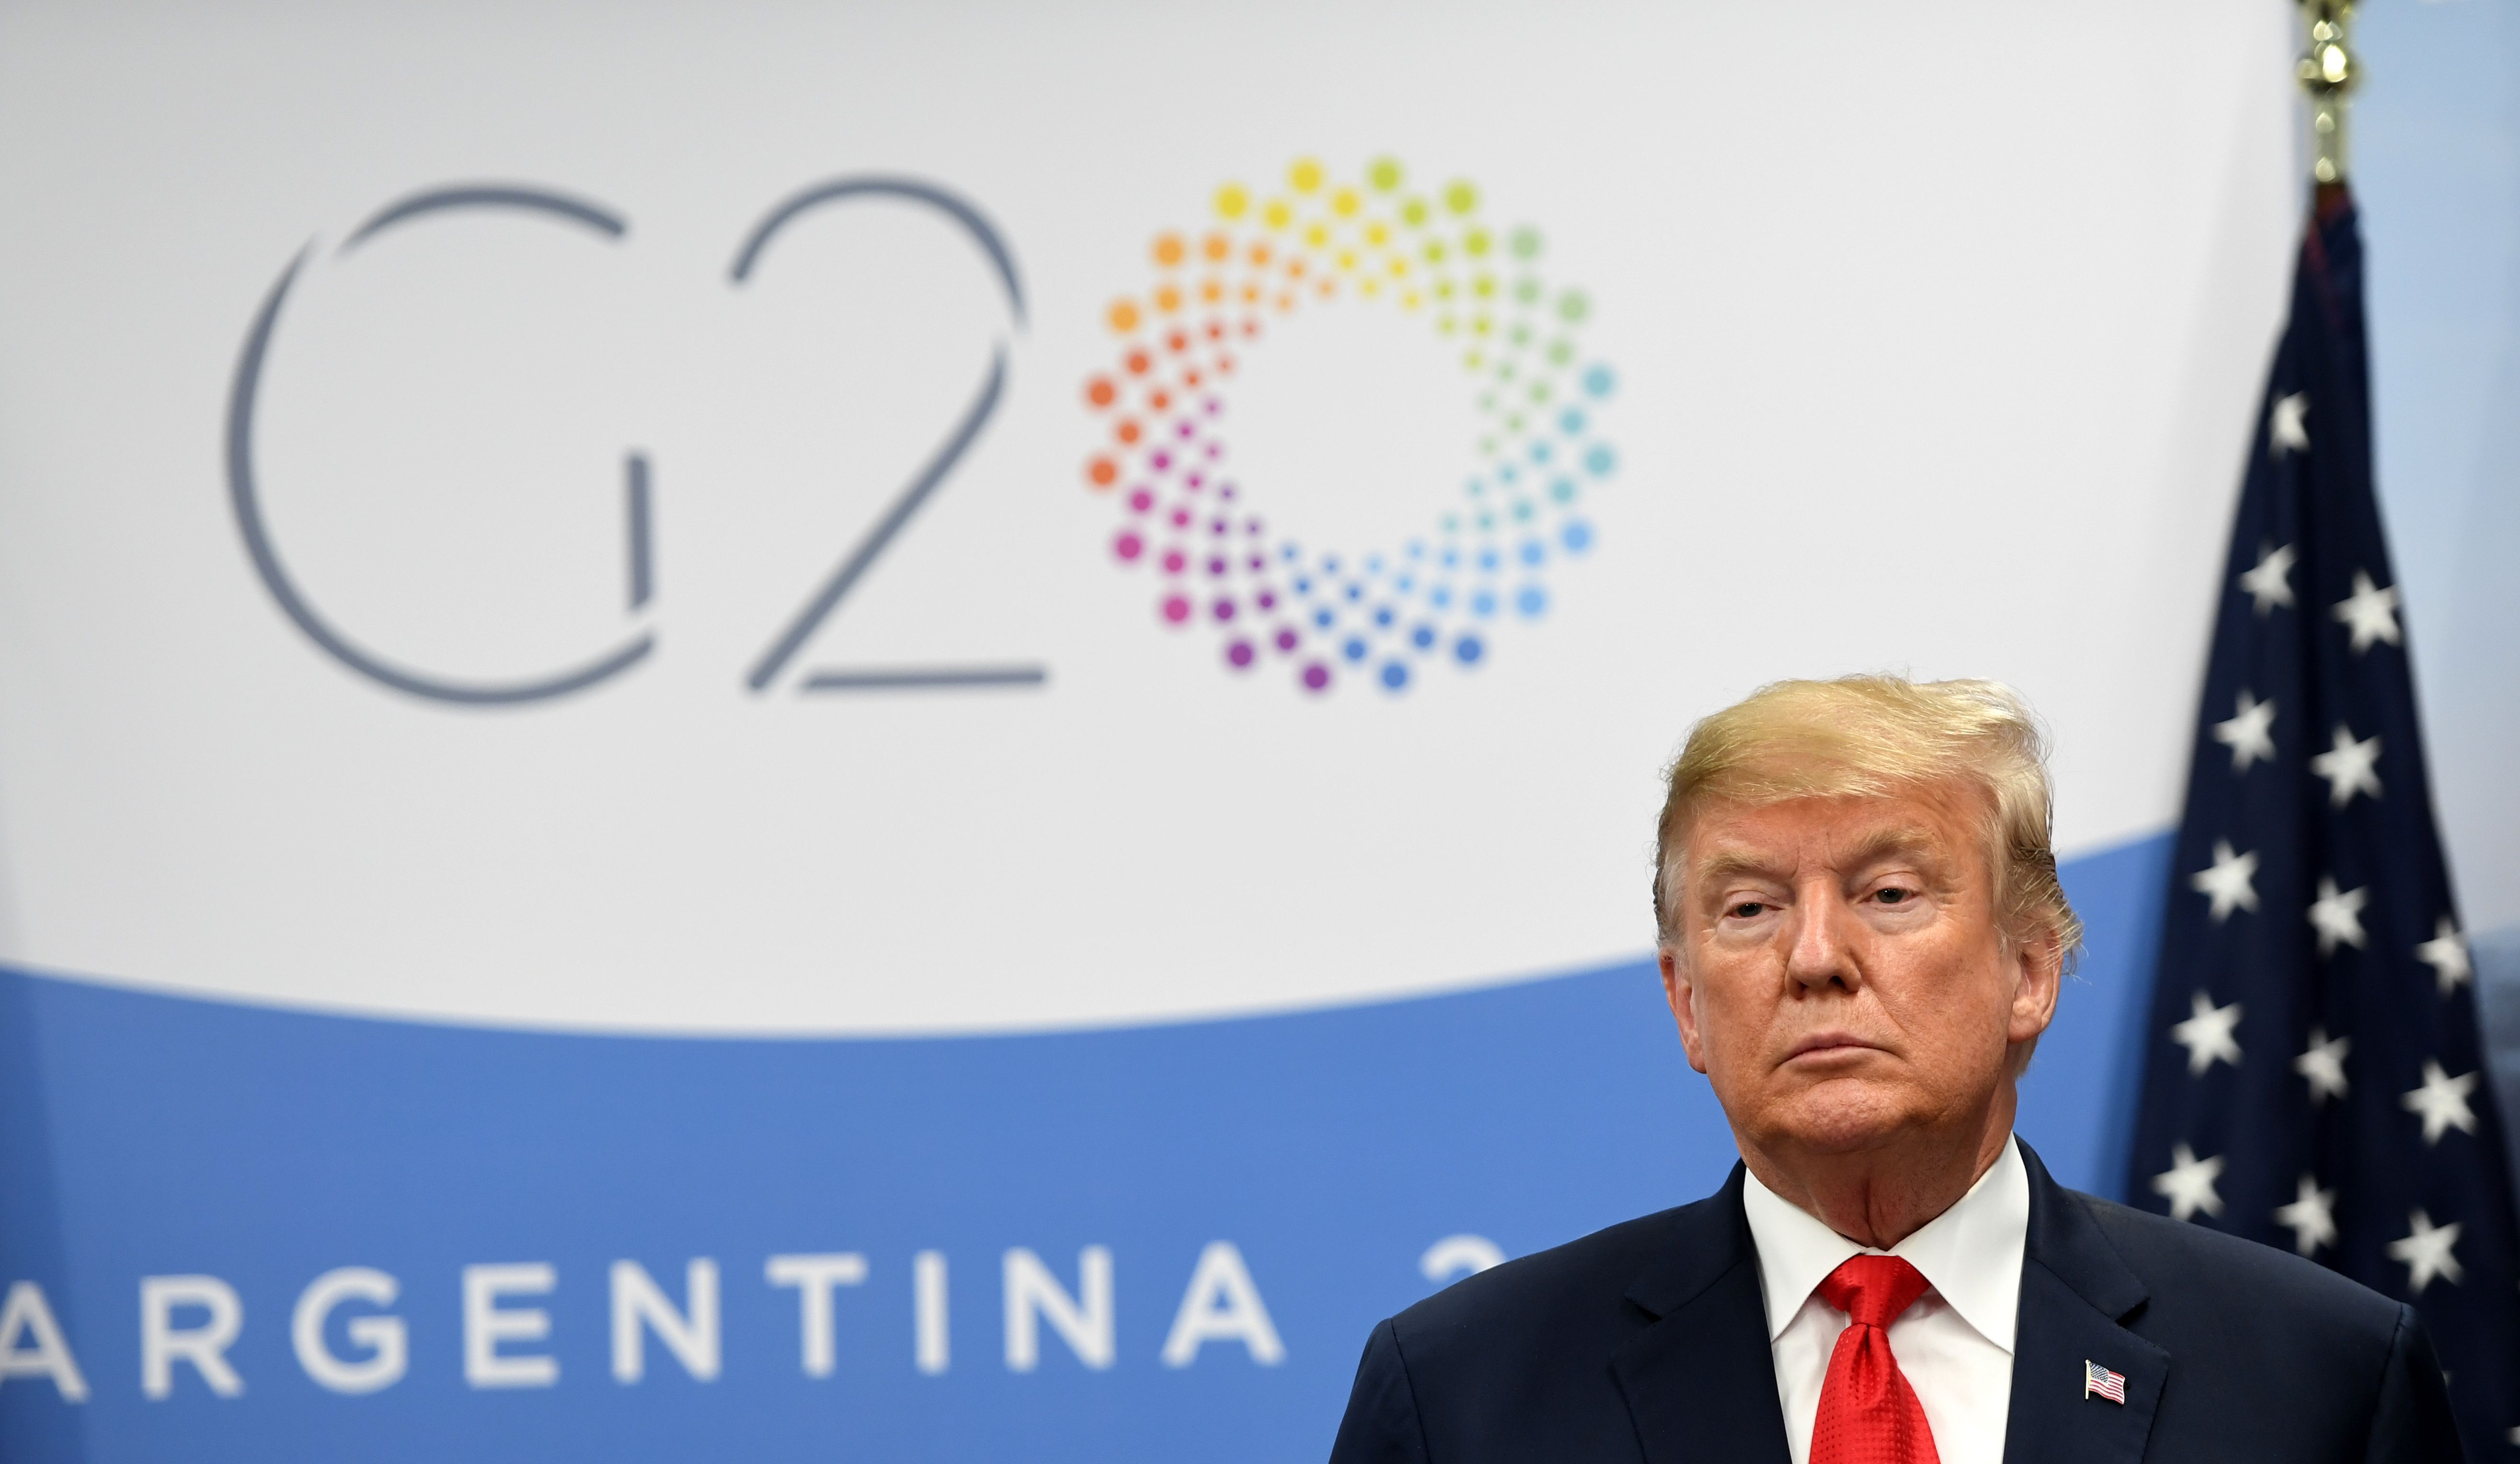 President Donald Trump attends G20 summit in Buenos Aires, November 30